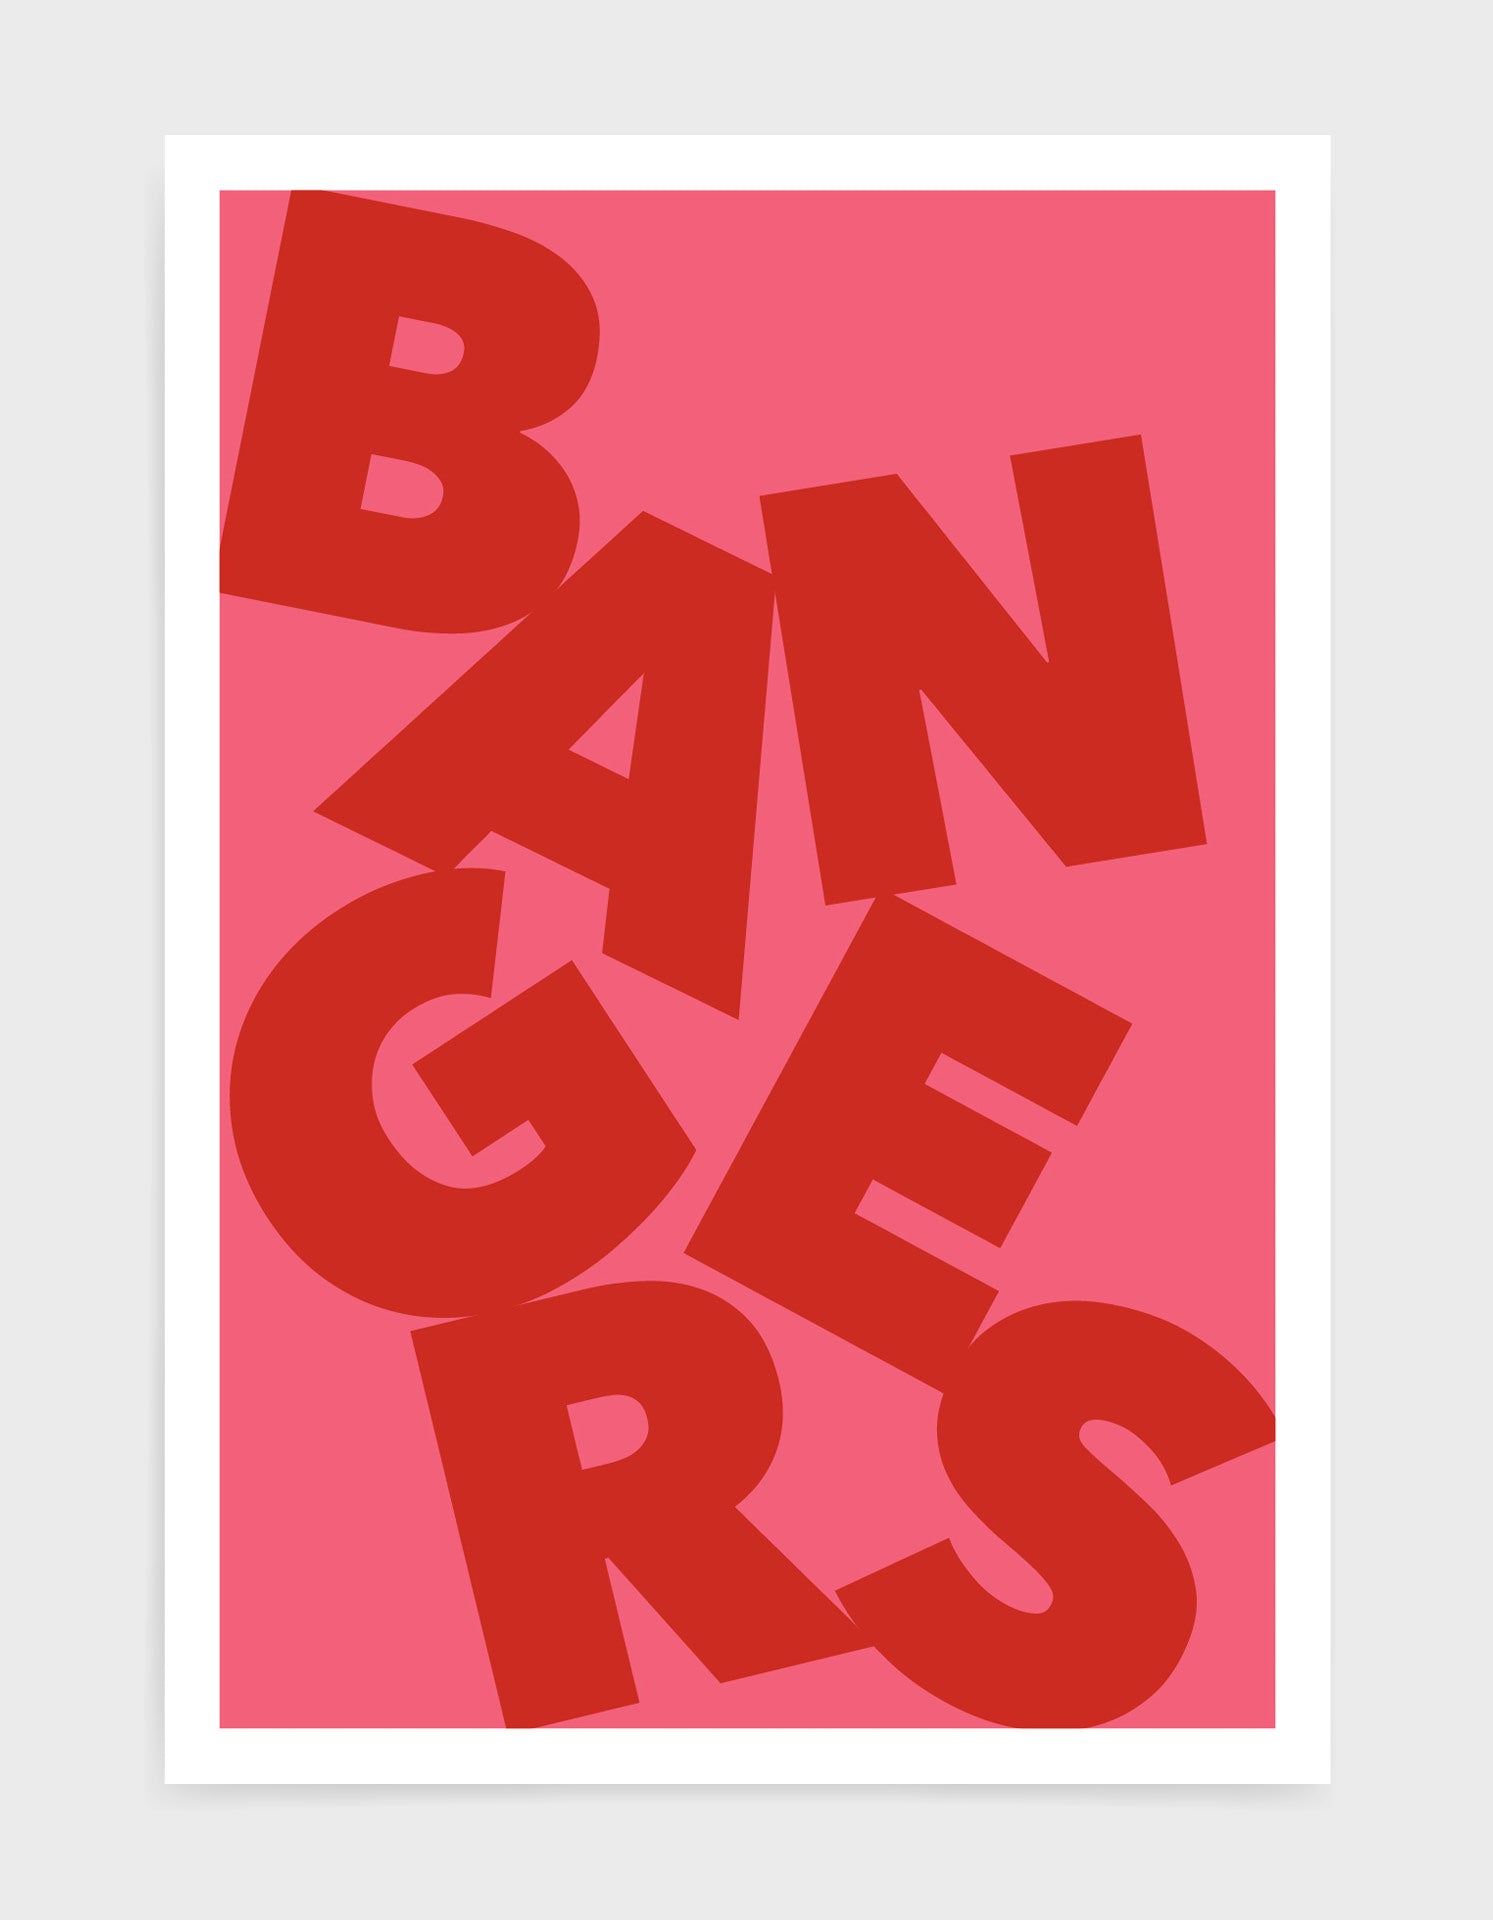 typography art print of the word Bangers in red text against a pink background